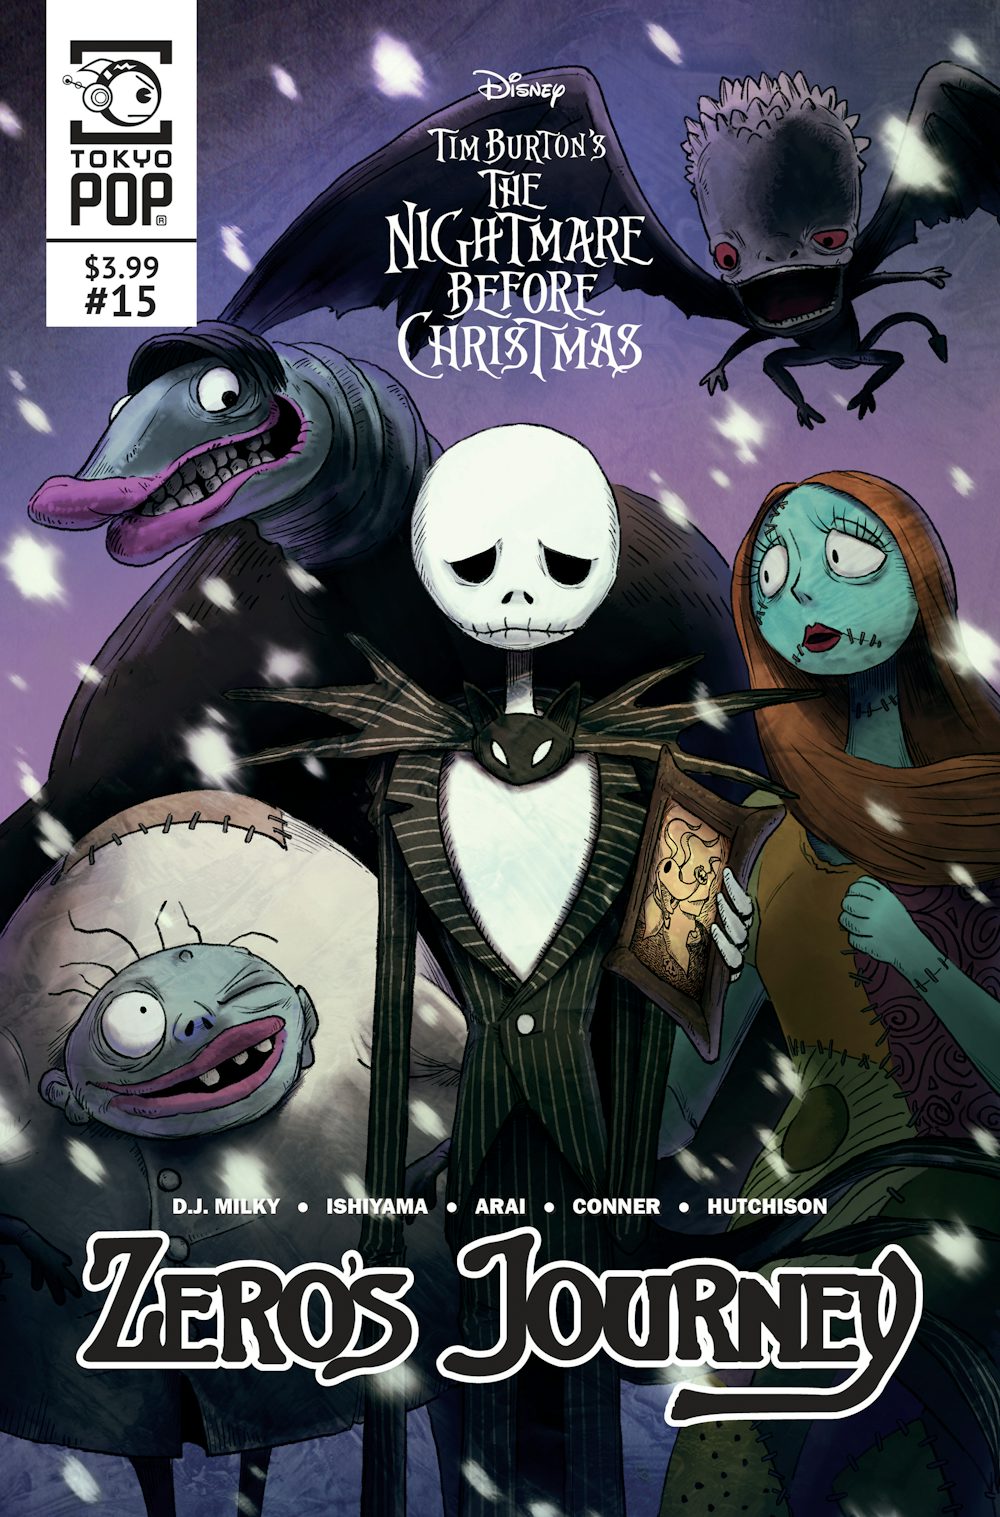 A Live Adapation of Tim Burton's 'Nightmare Before Christmas